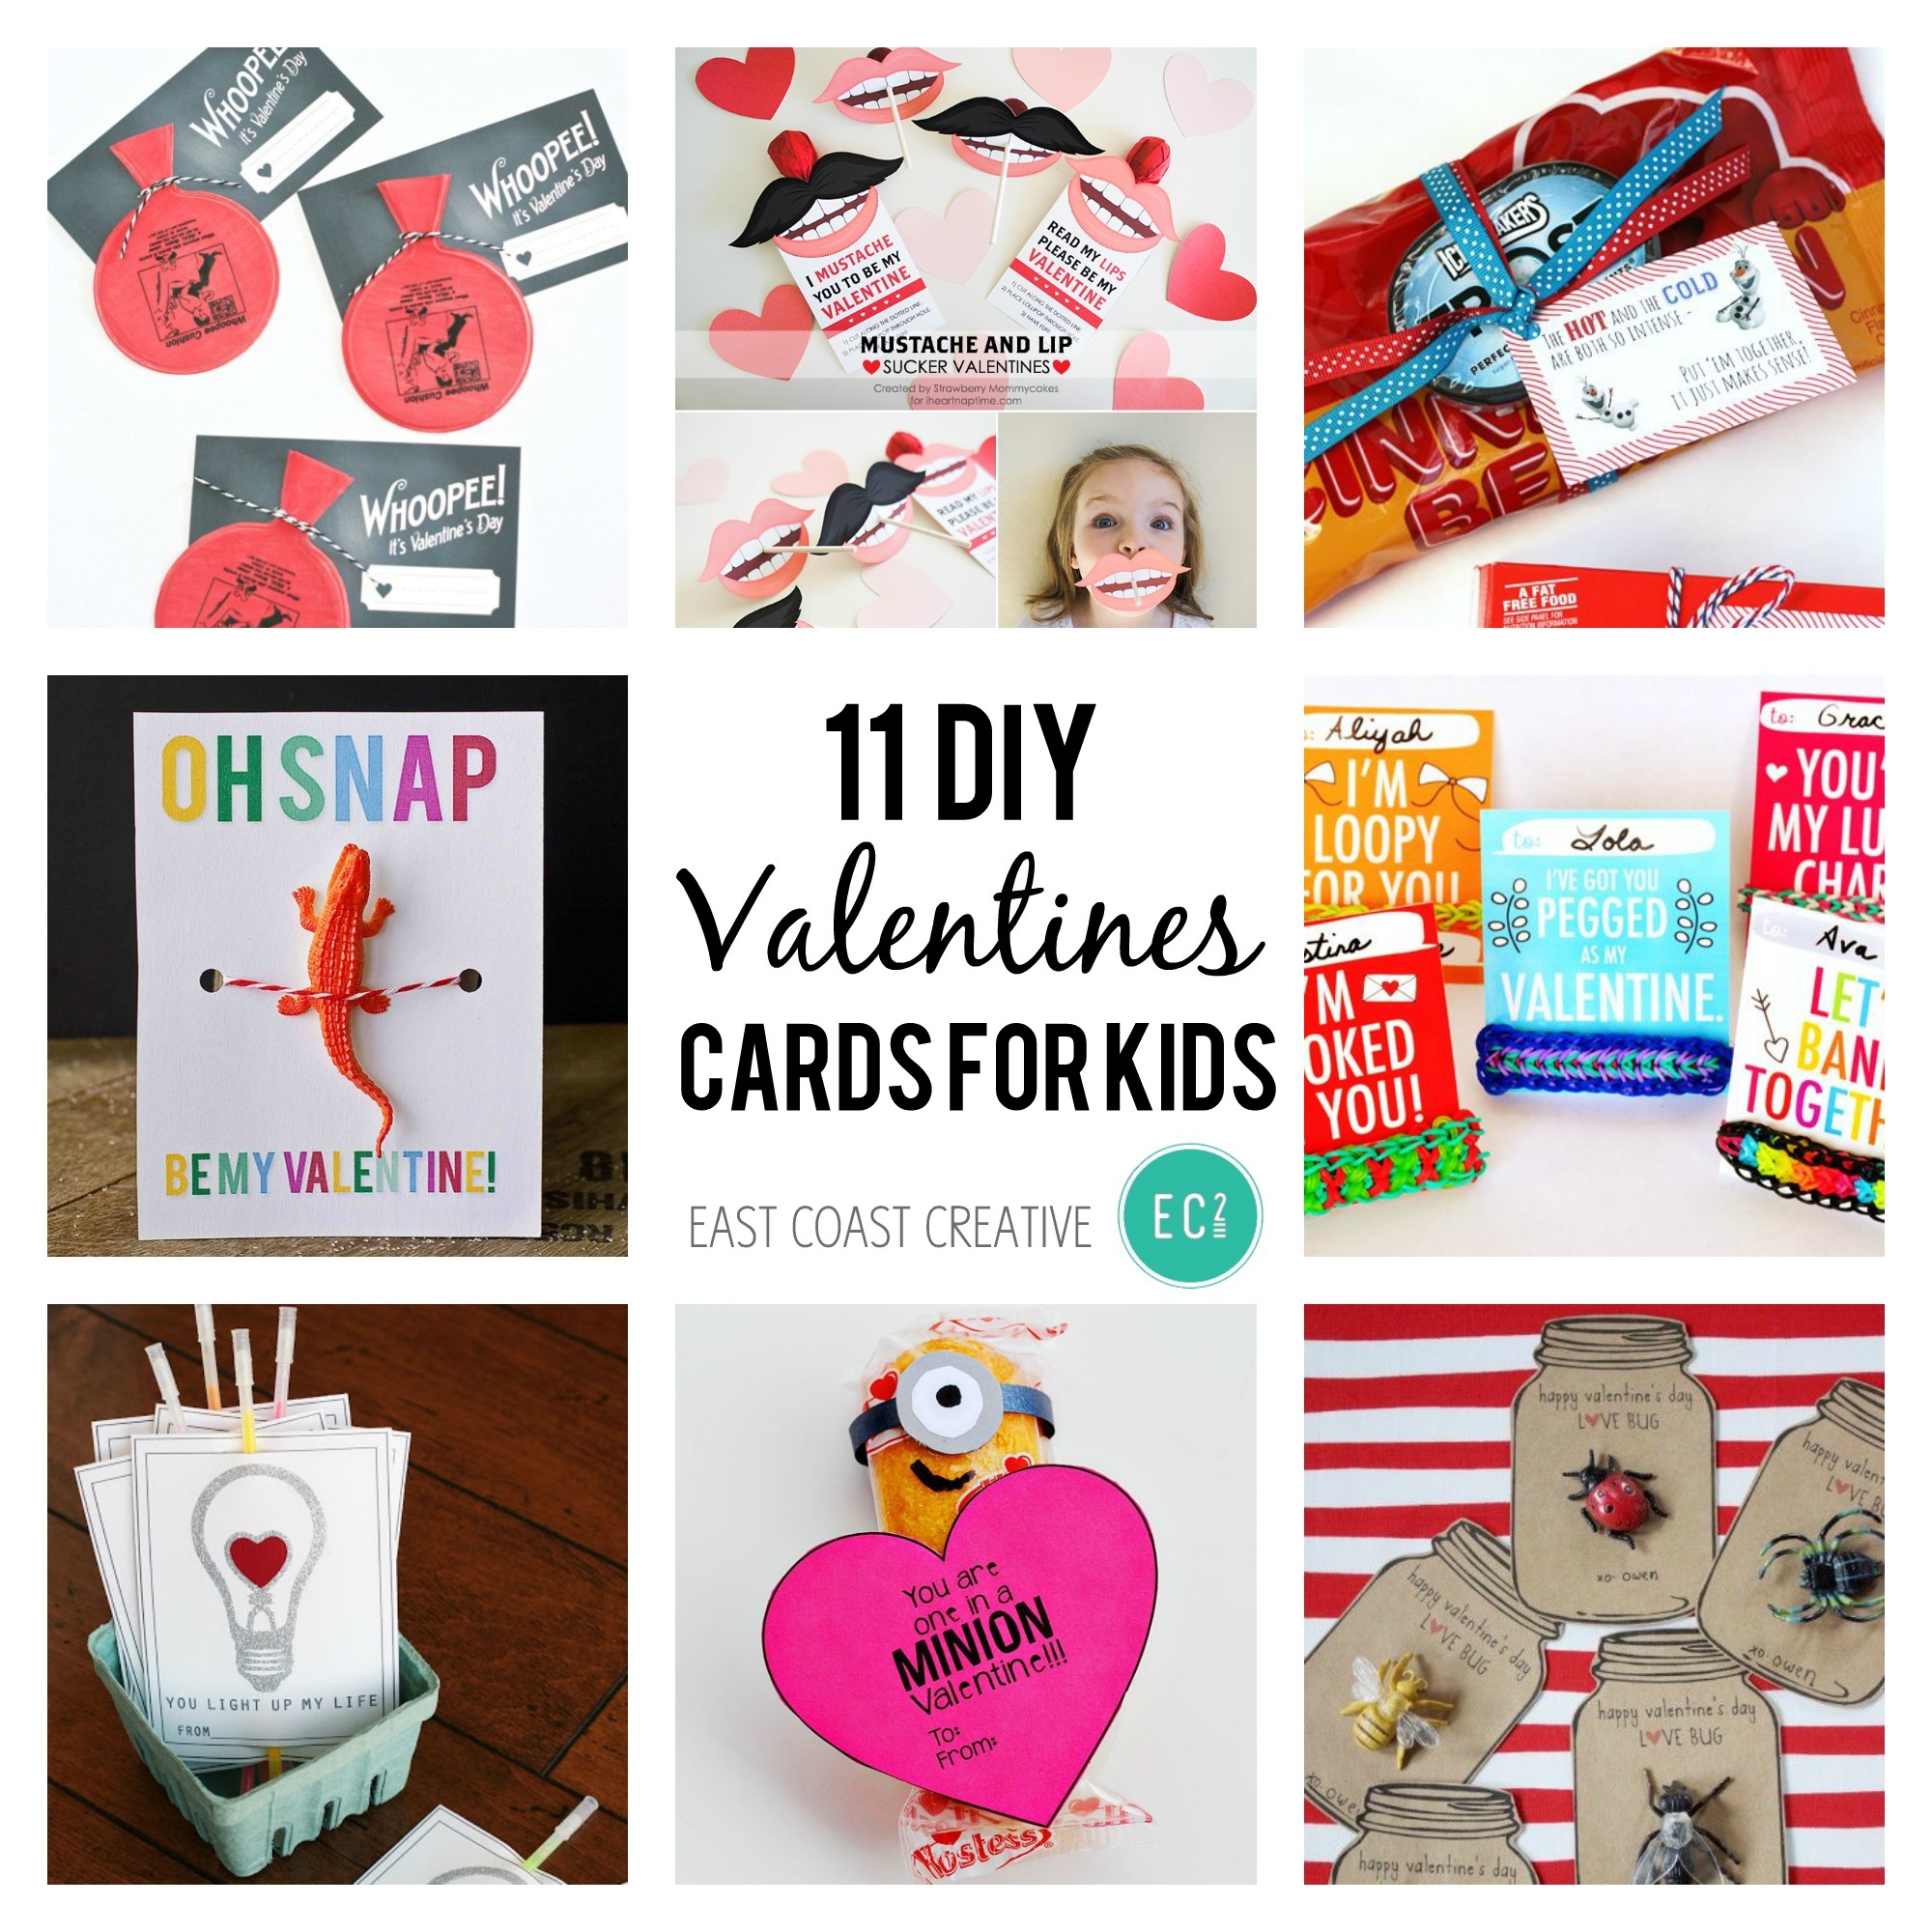  Valentines Day Cards for Kids - Valentines Day Gifts